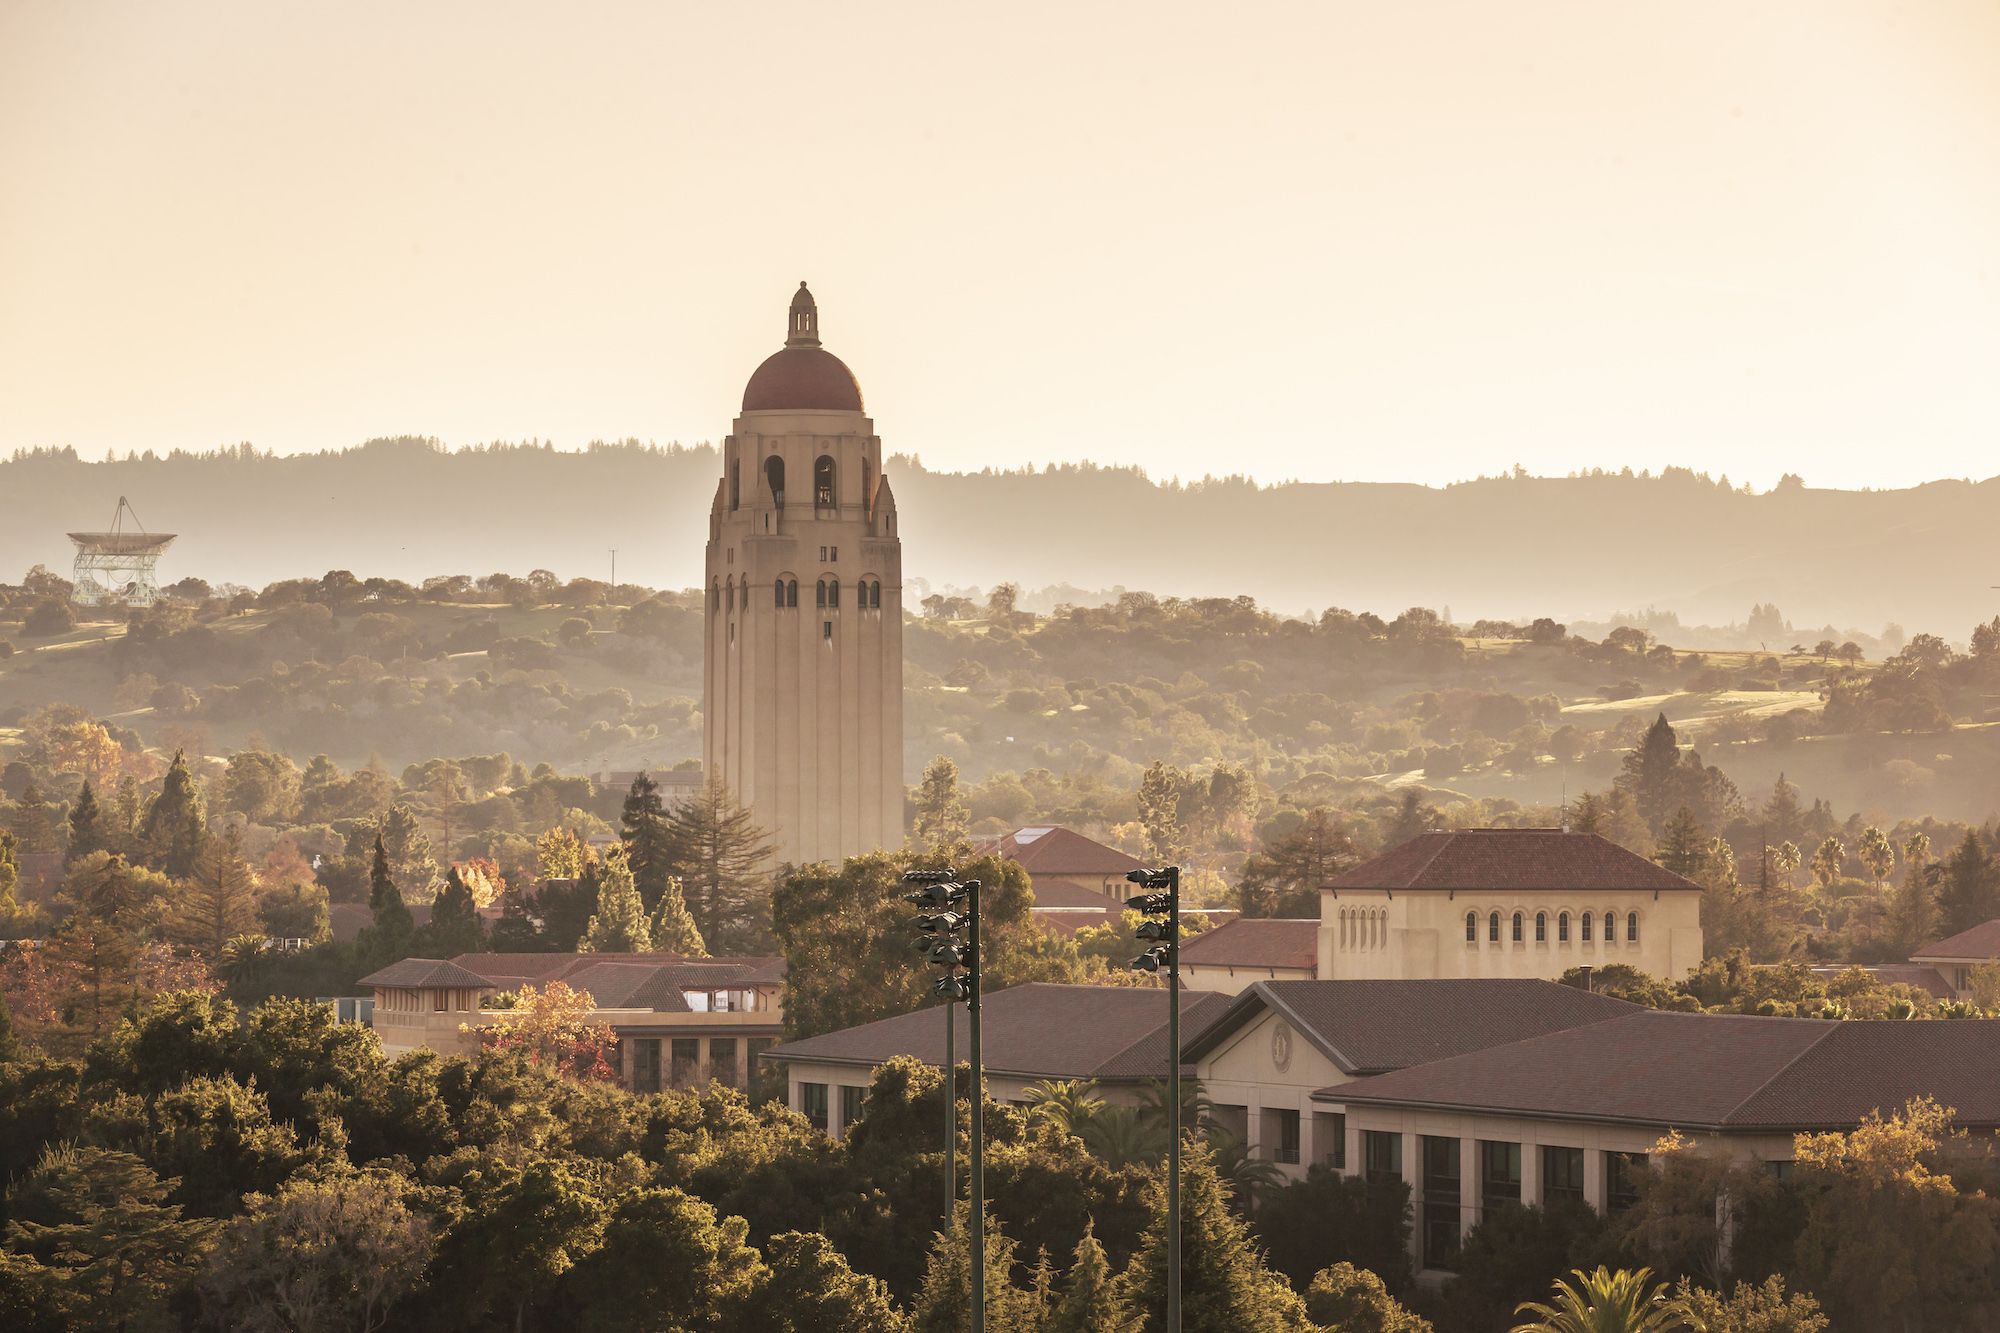 Why is Stanford ranked so high?